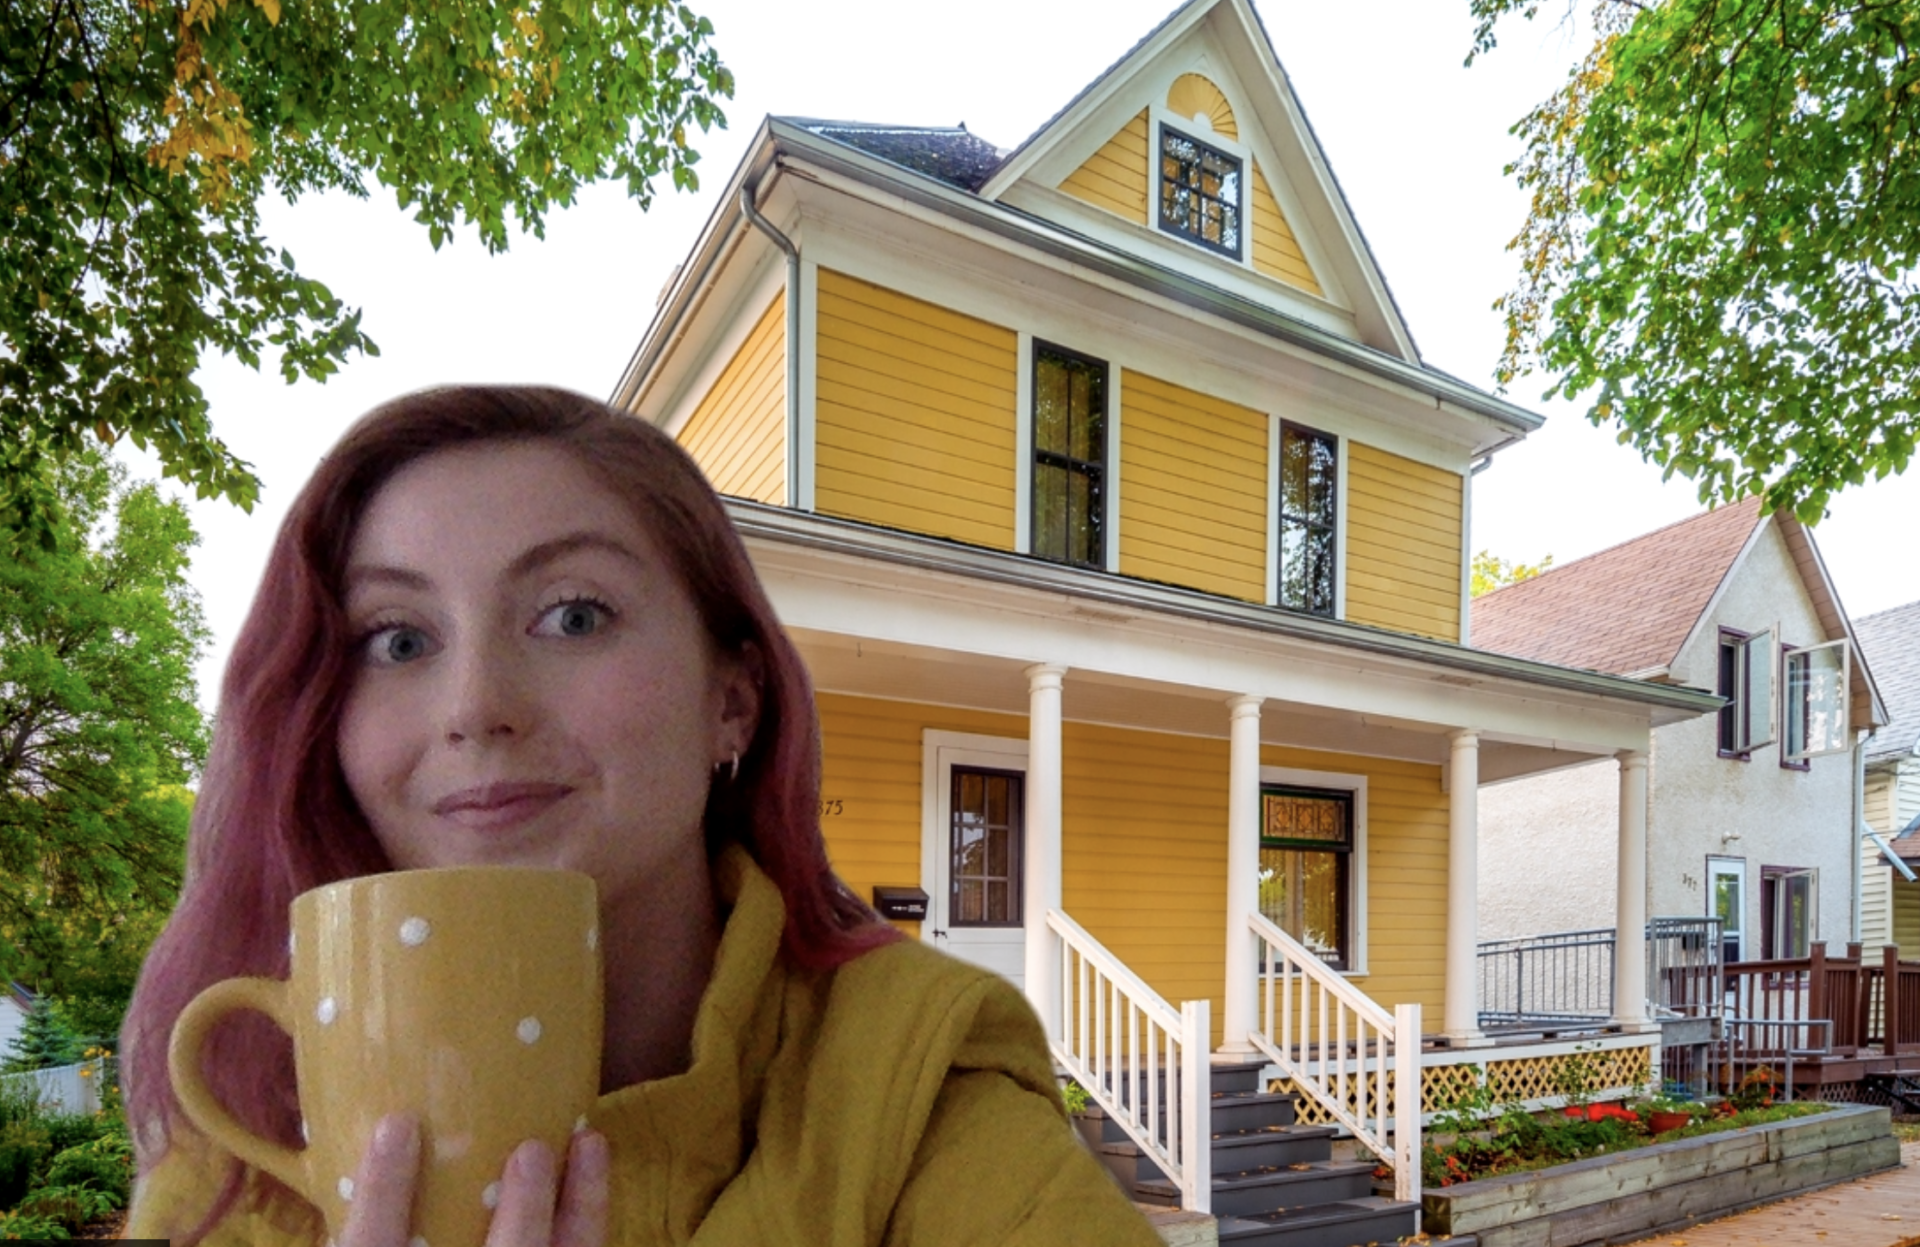 A woman wears yellow next to a yellow home.